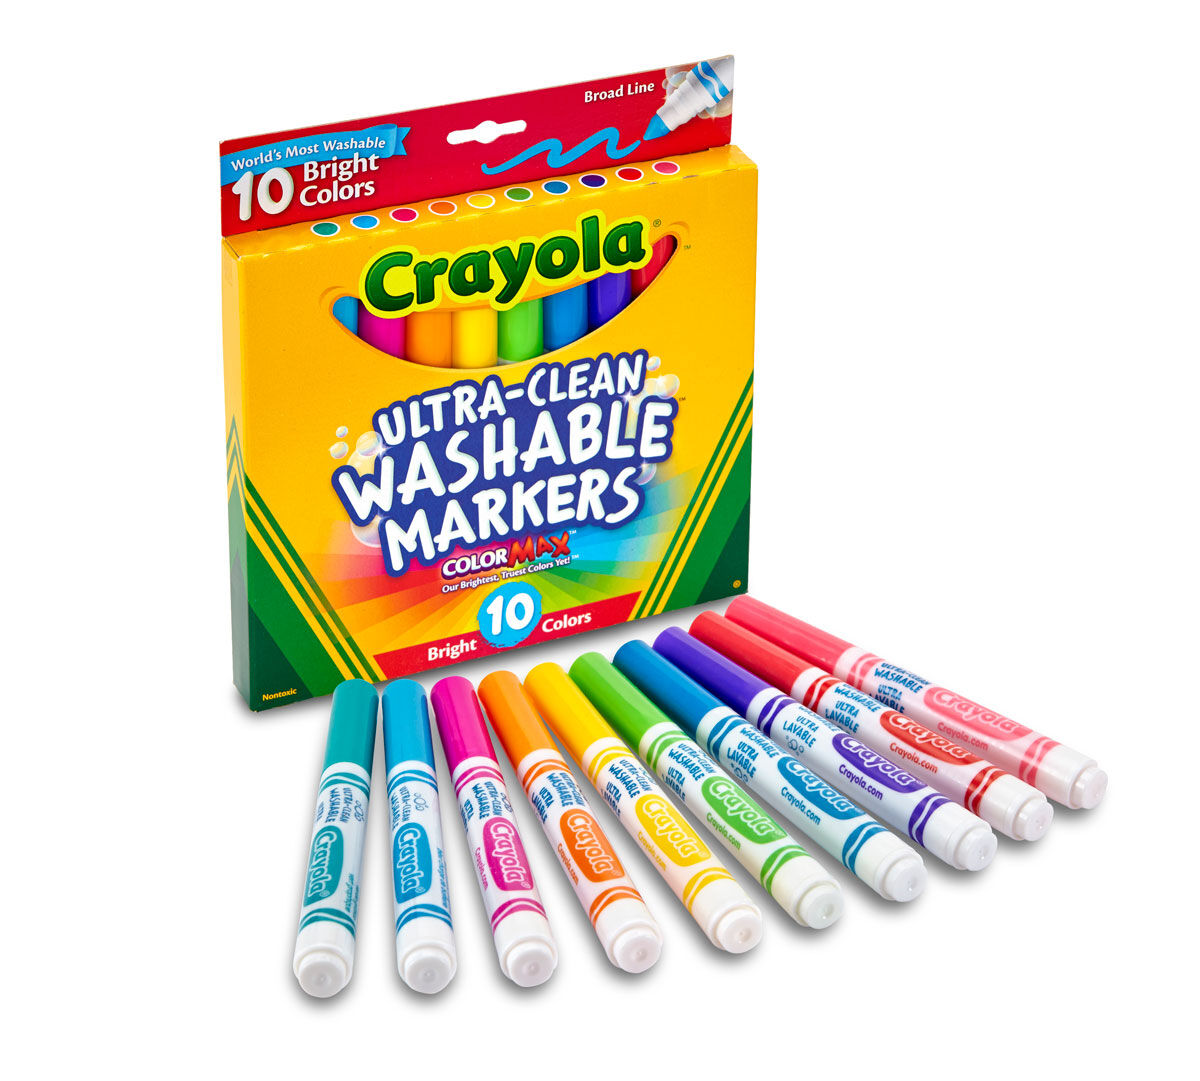 CRAYOLA Ultra-Clean Color Max Broad Line Washable Markers-Multicultural 10/Pkg 